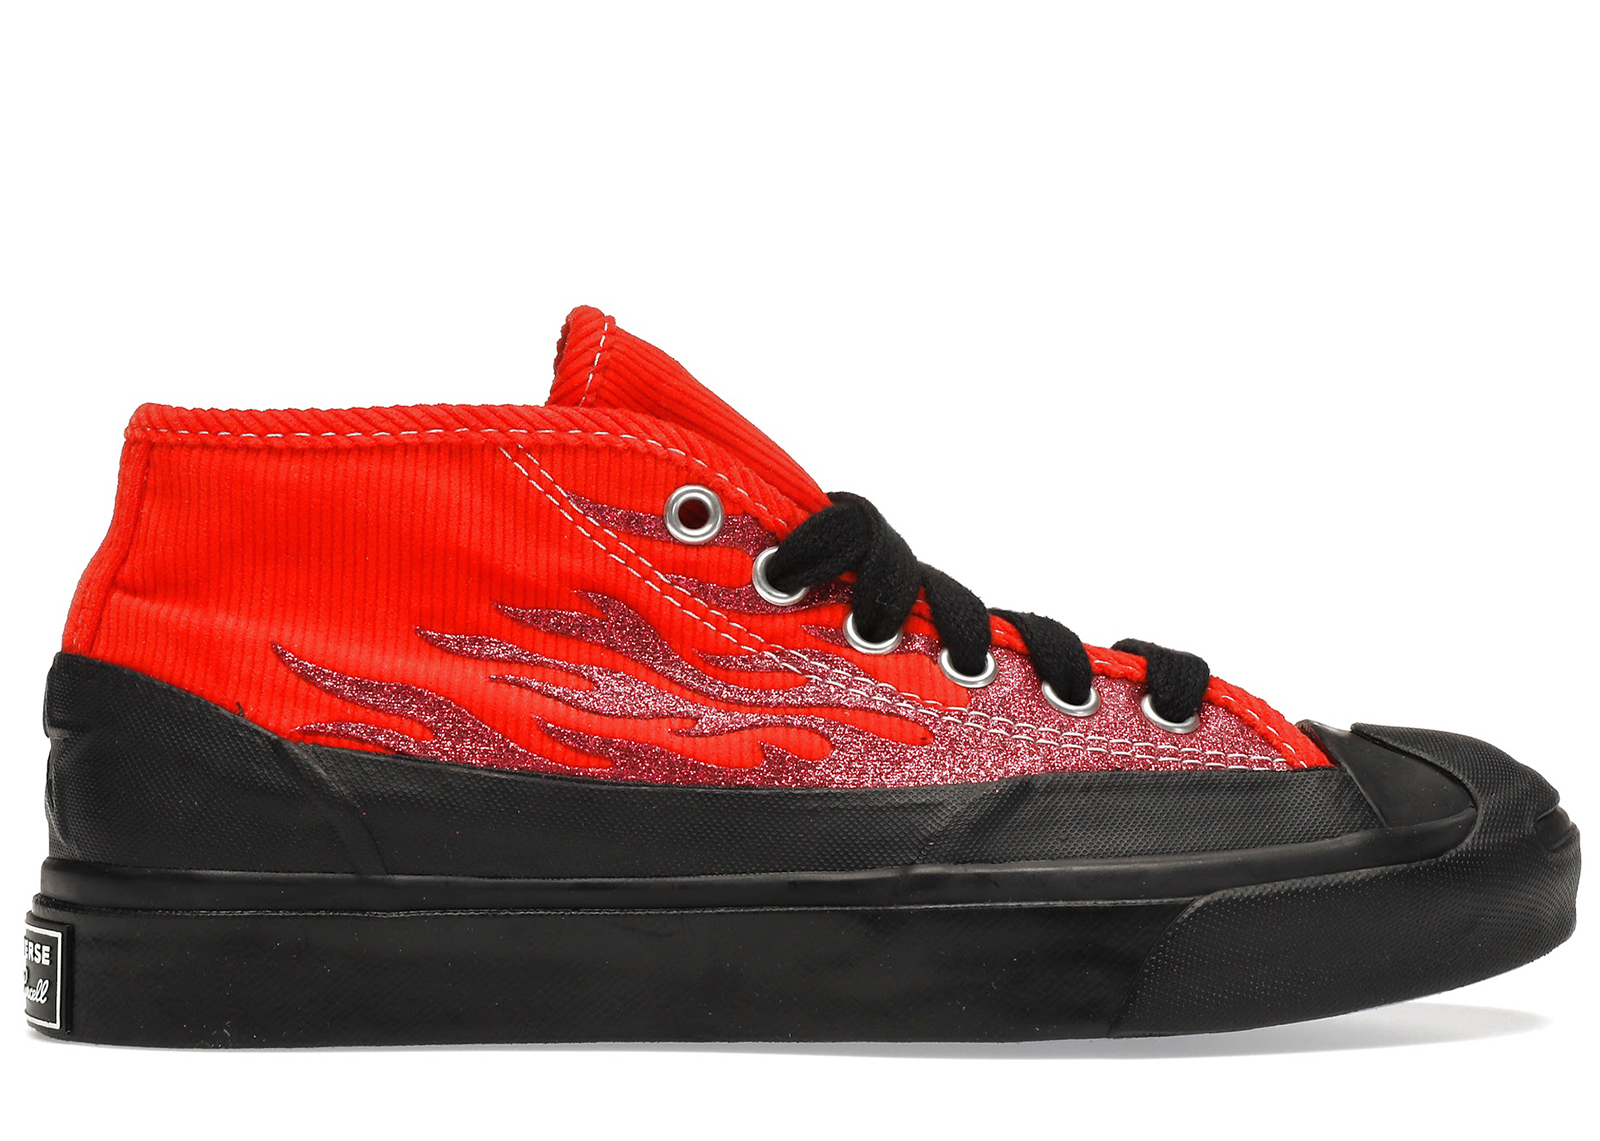 Converse Jack Purcell Chukka Mid ASAP Nast Red メンズ - 167378C - JP